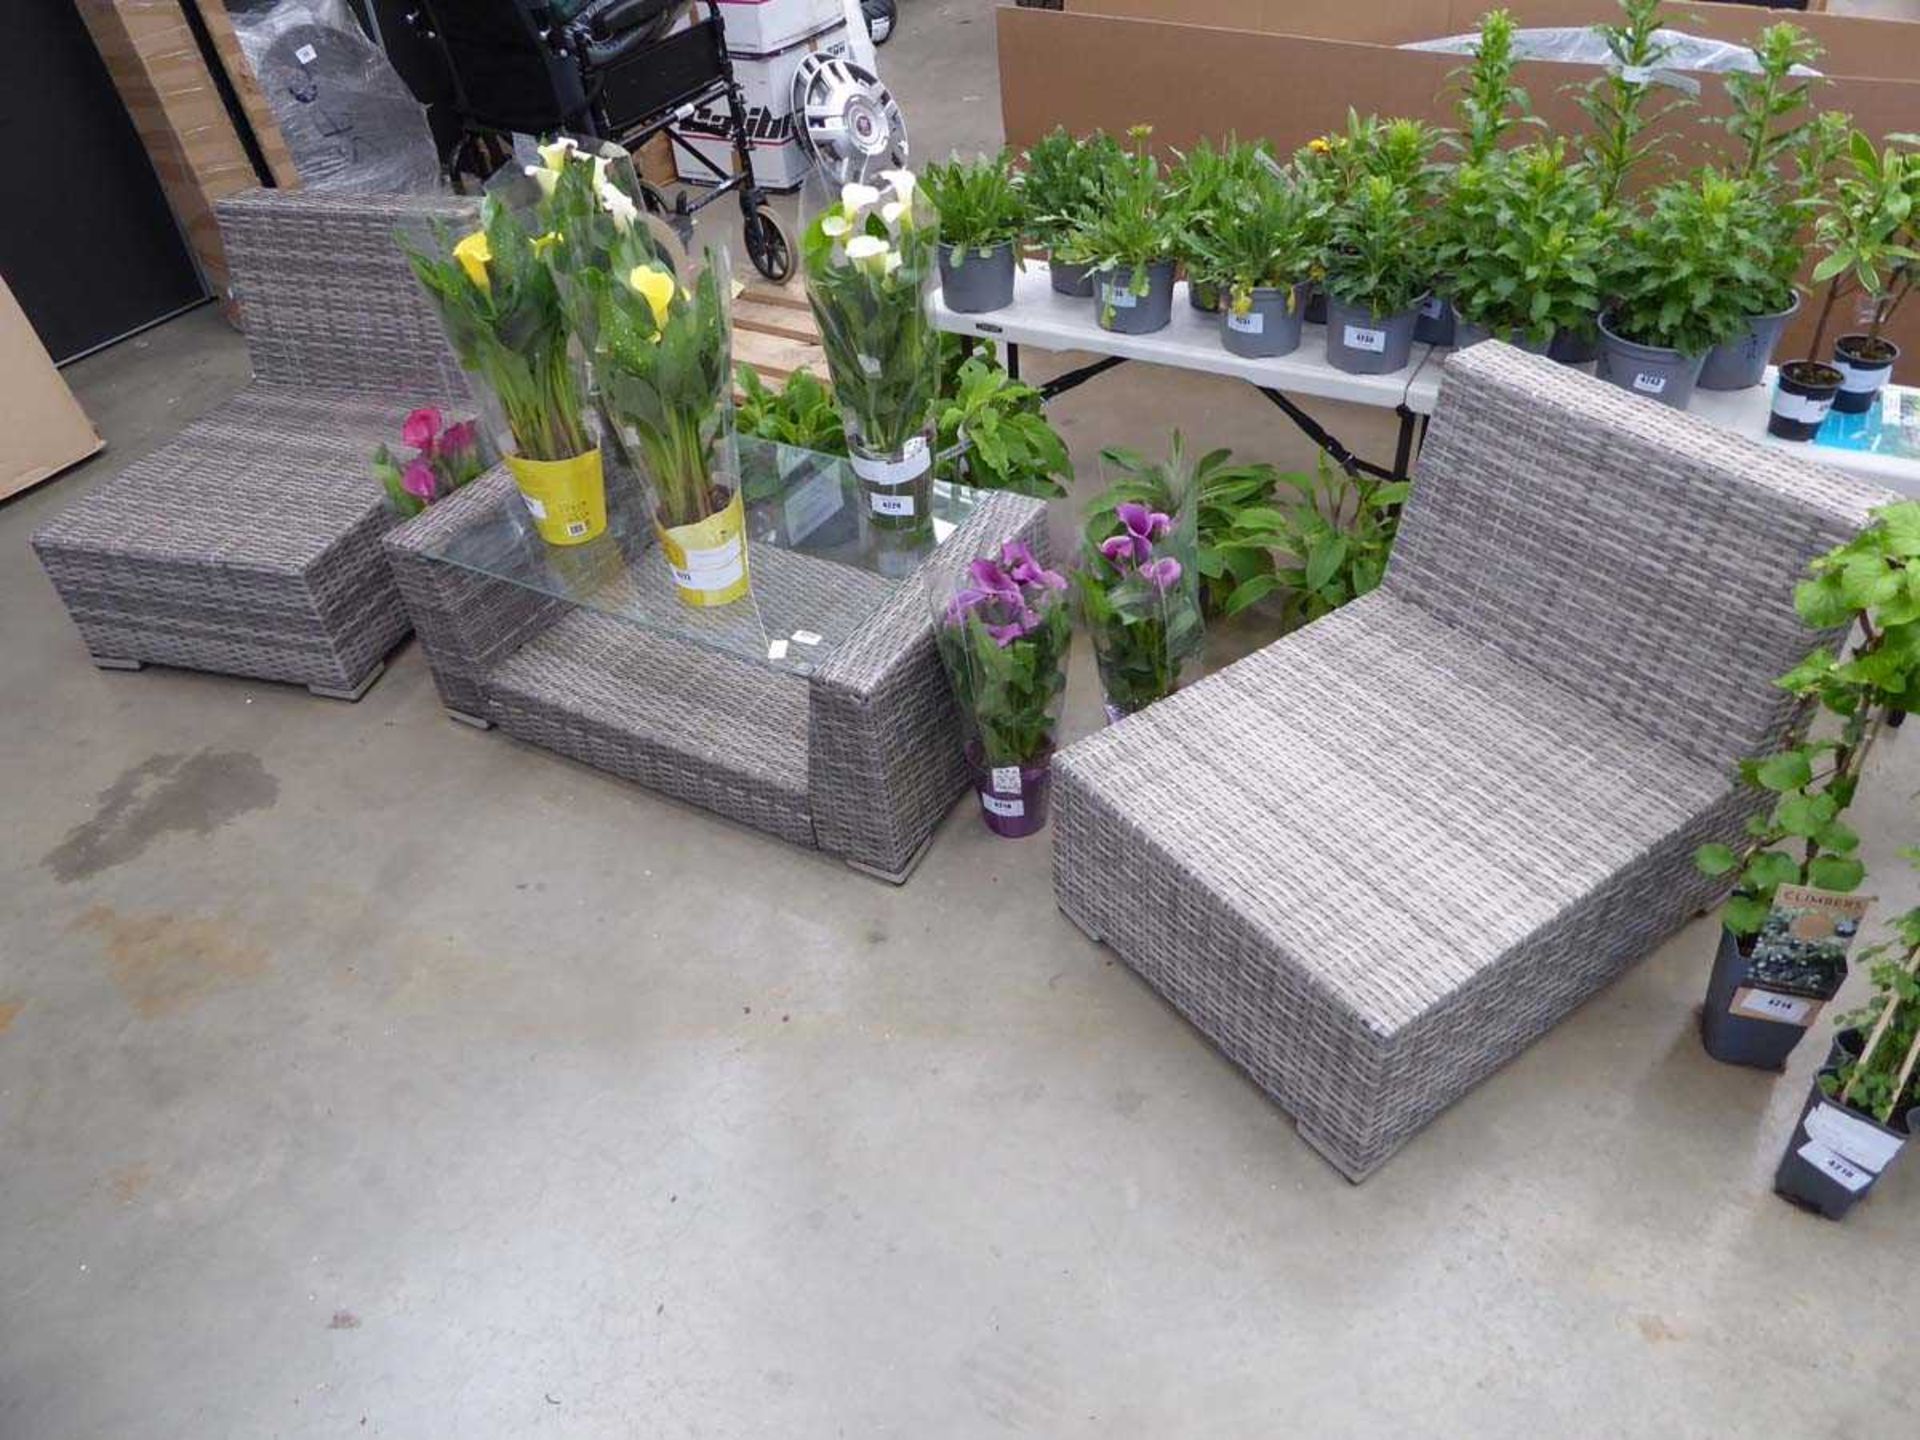 Rattan 3 piece garden set consisting of 2 chairs, glass topped table, no cushions